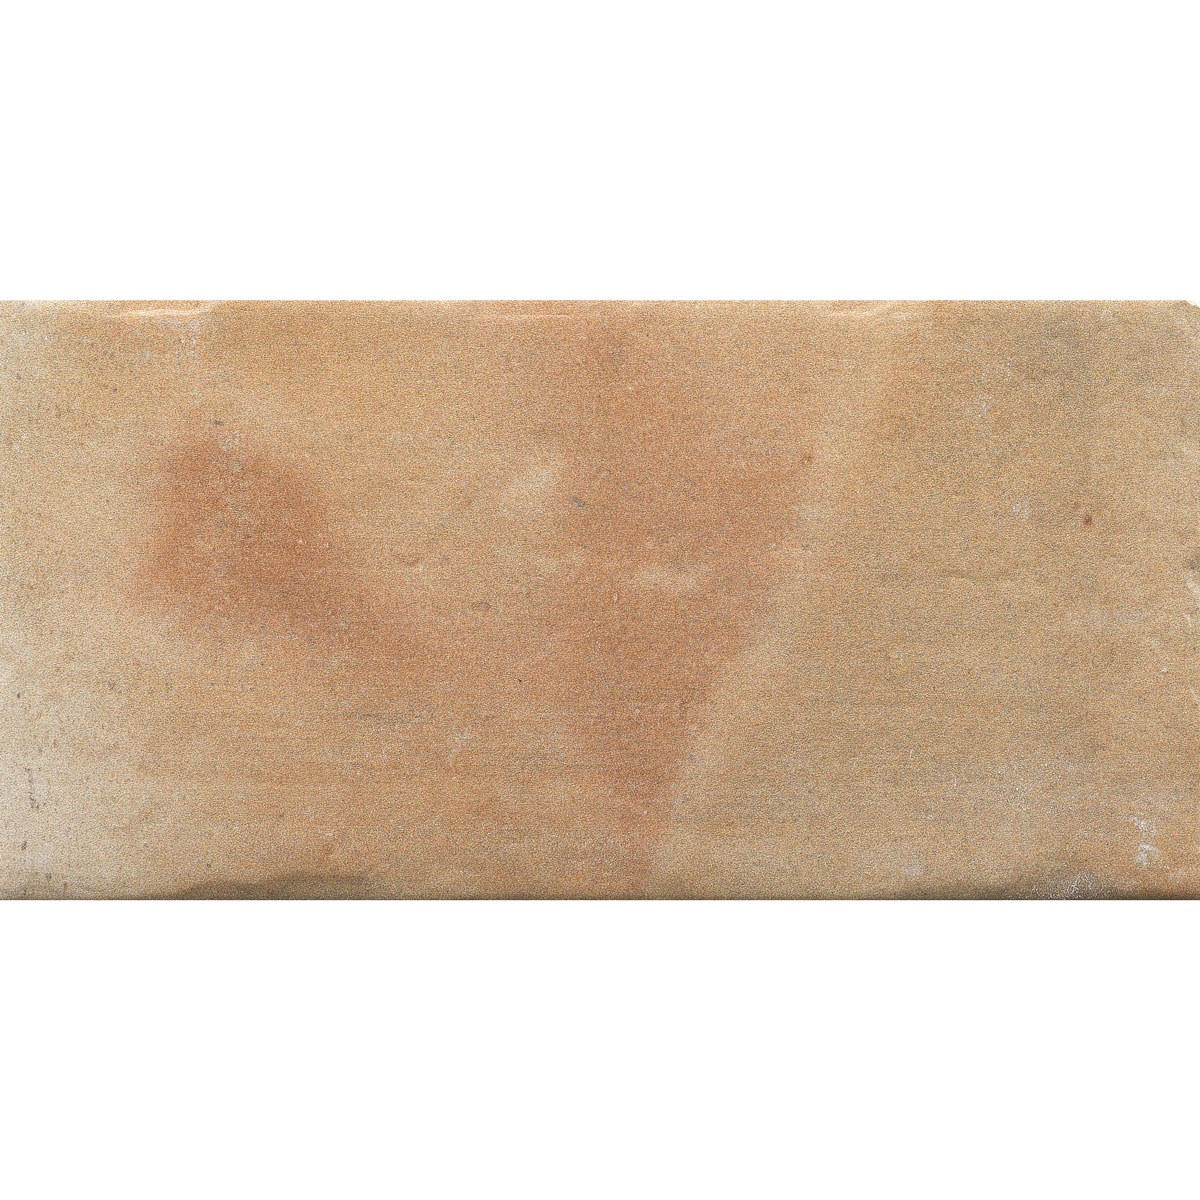 Seville Small Brick, product variant image